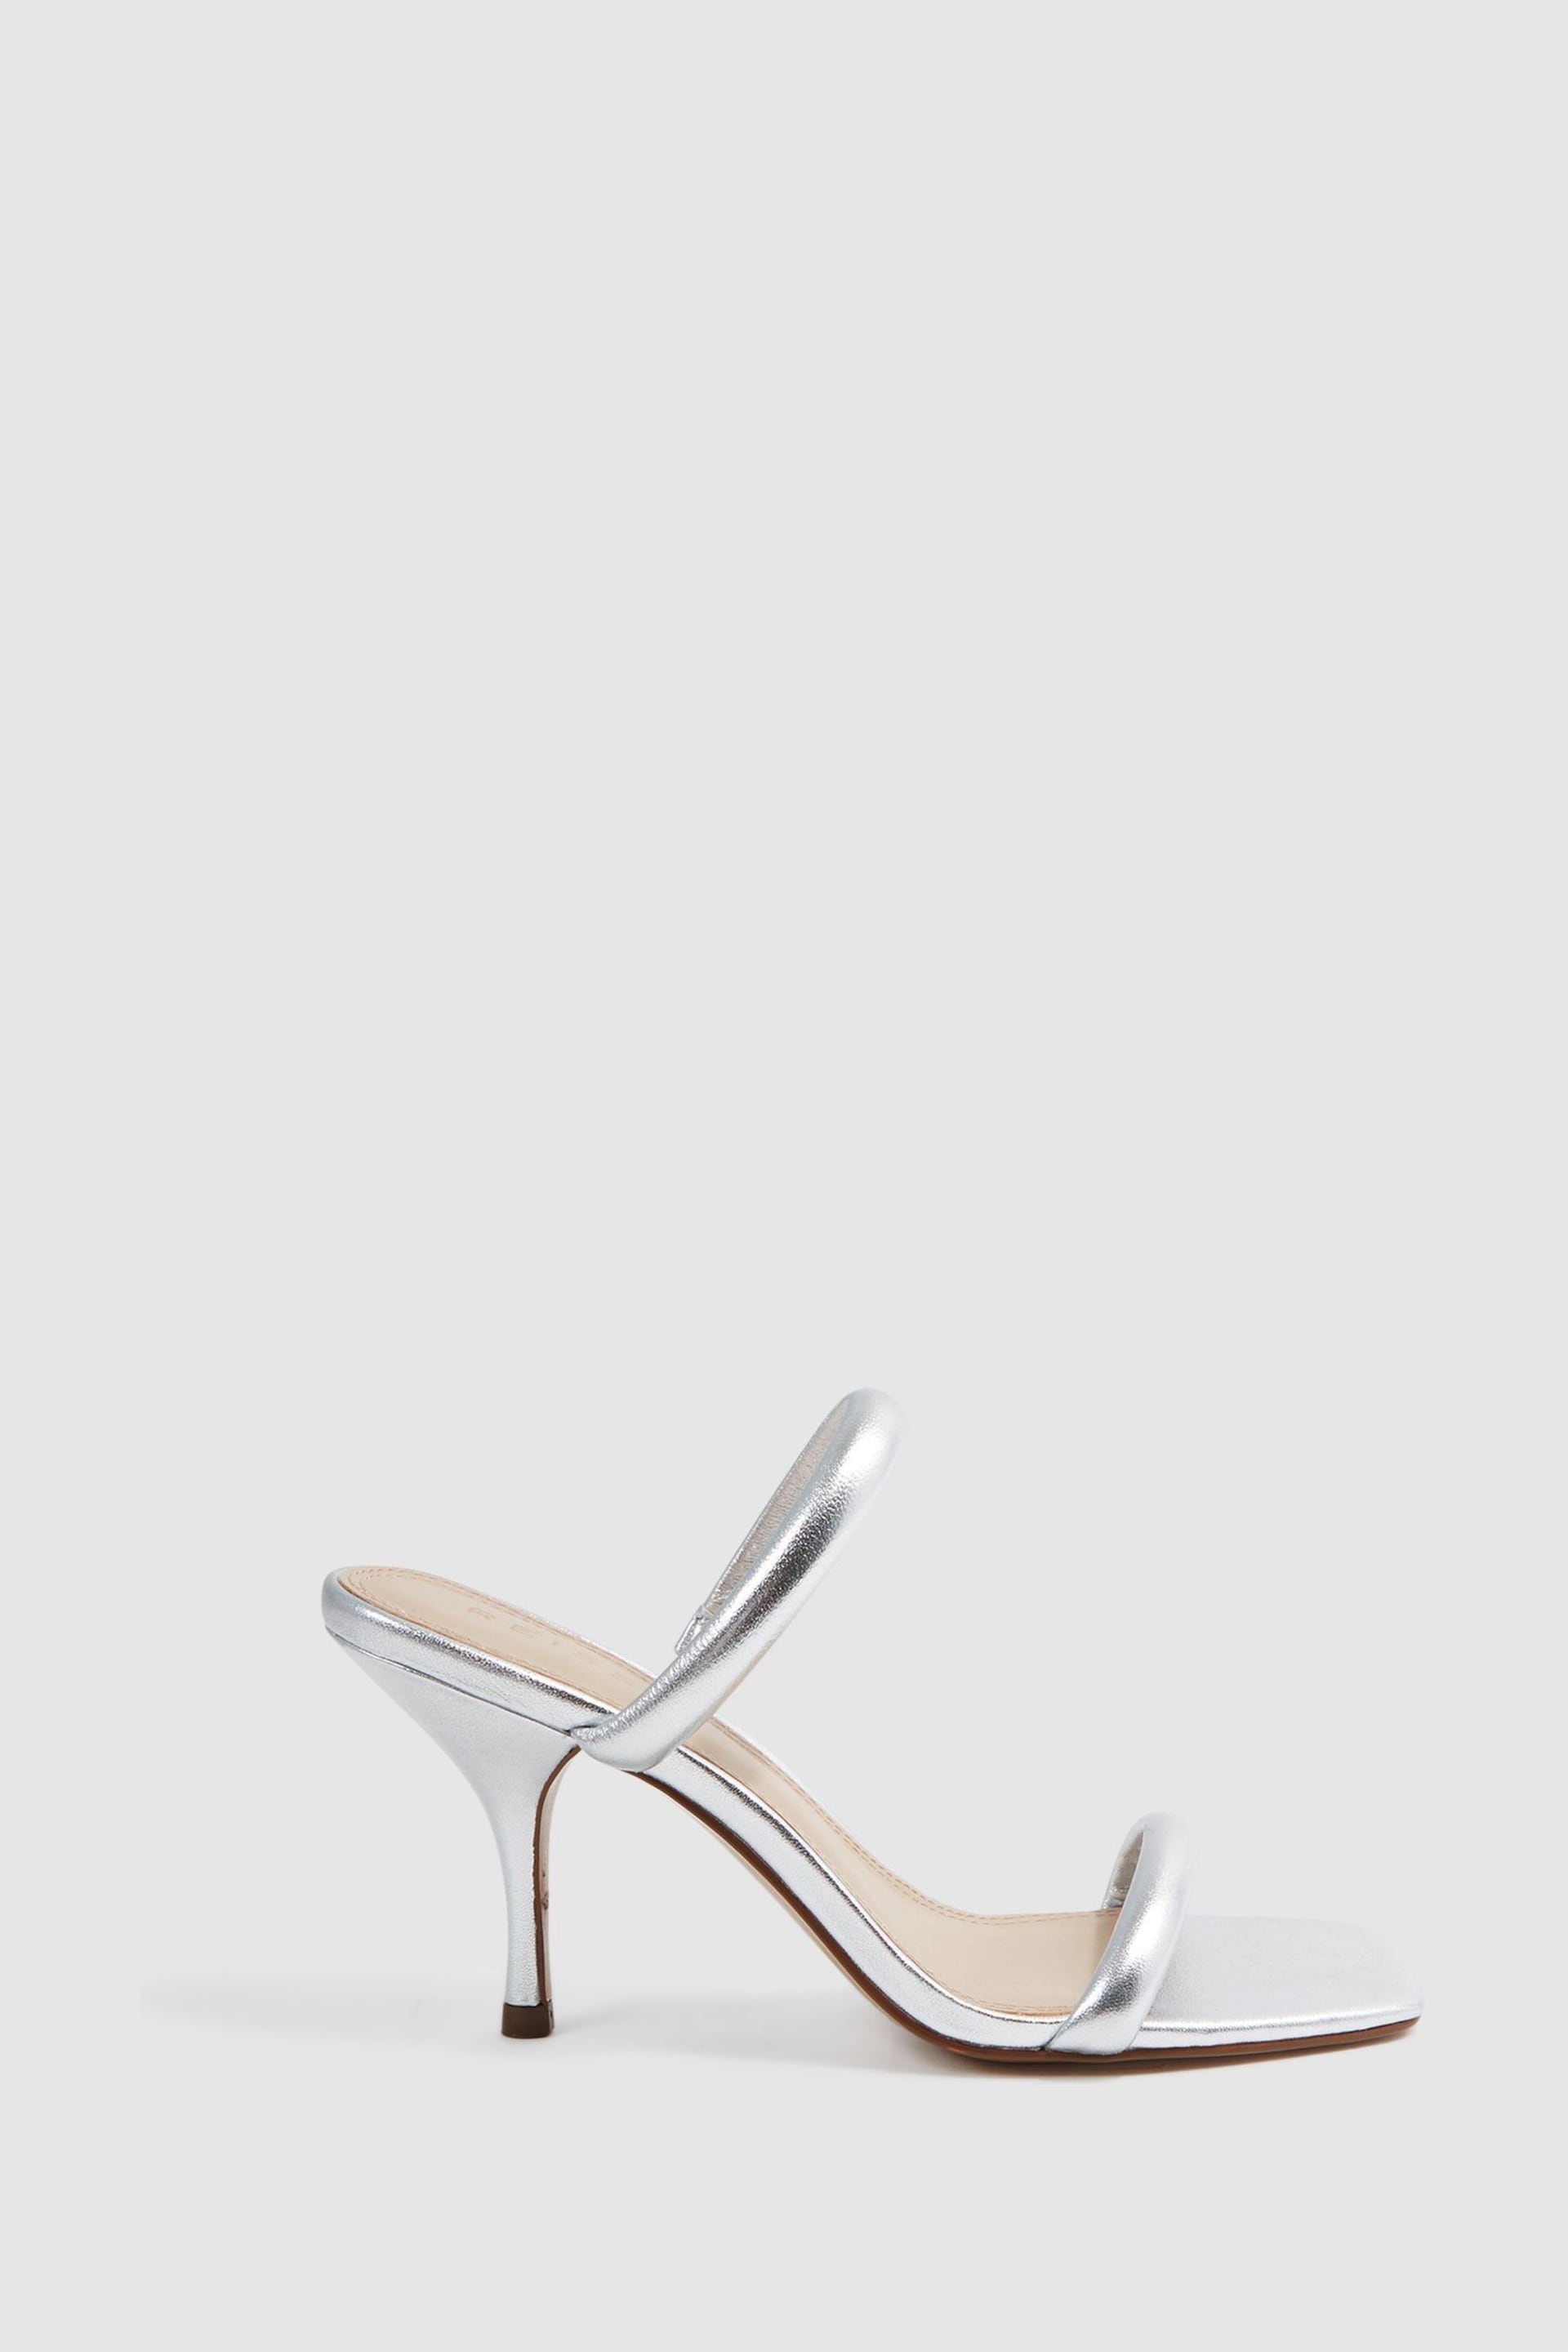 Reiss Silver Emery Leather Double Strap Heels - Image 1 of 5